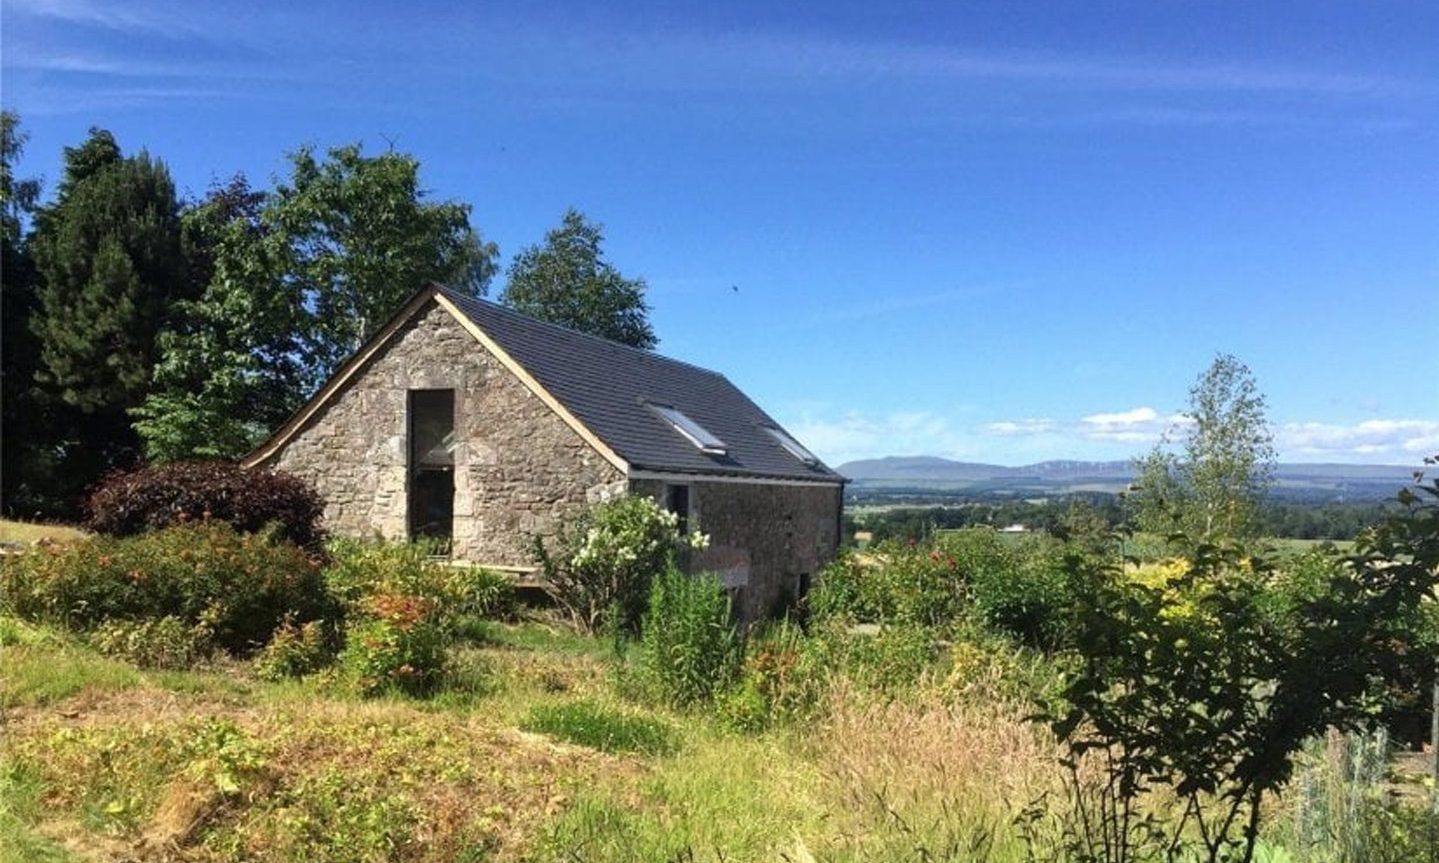 The property has views of the Trossachs and Grampian hills. Image: Slater Hogg & Howison